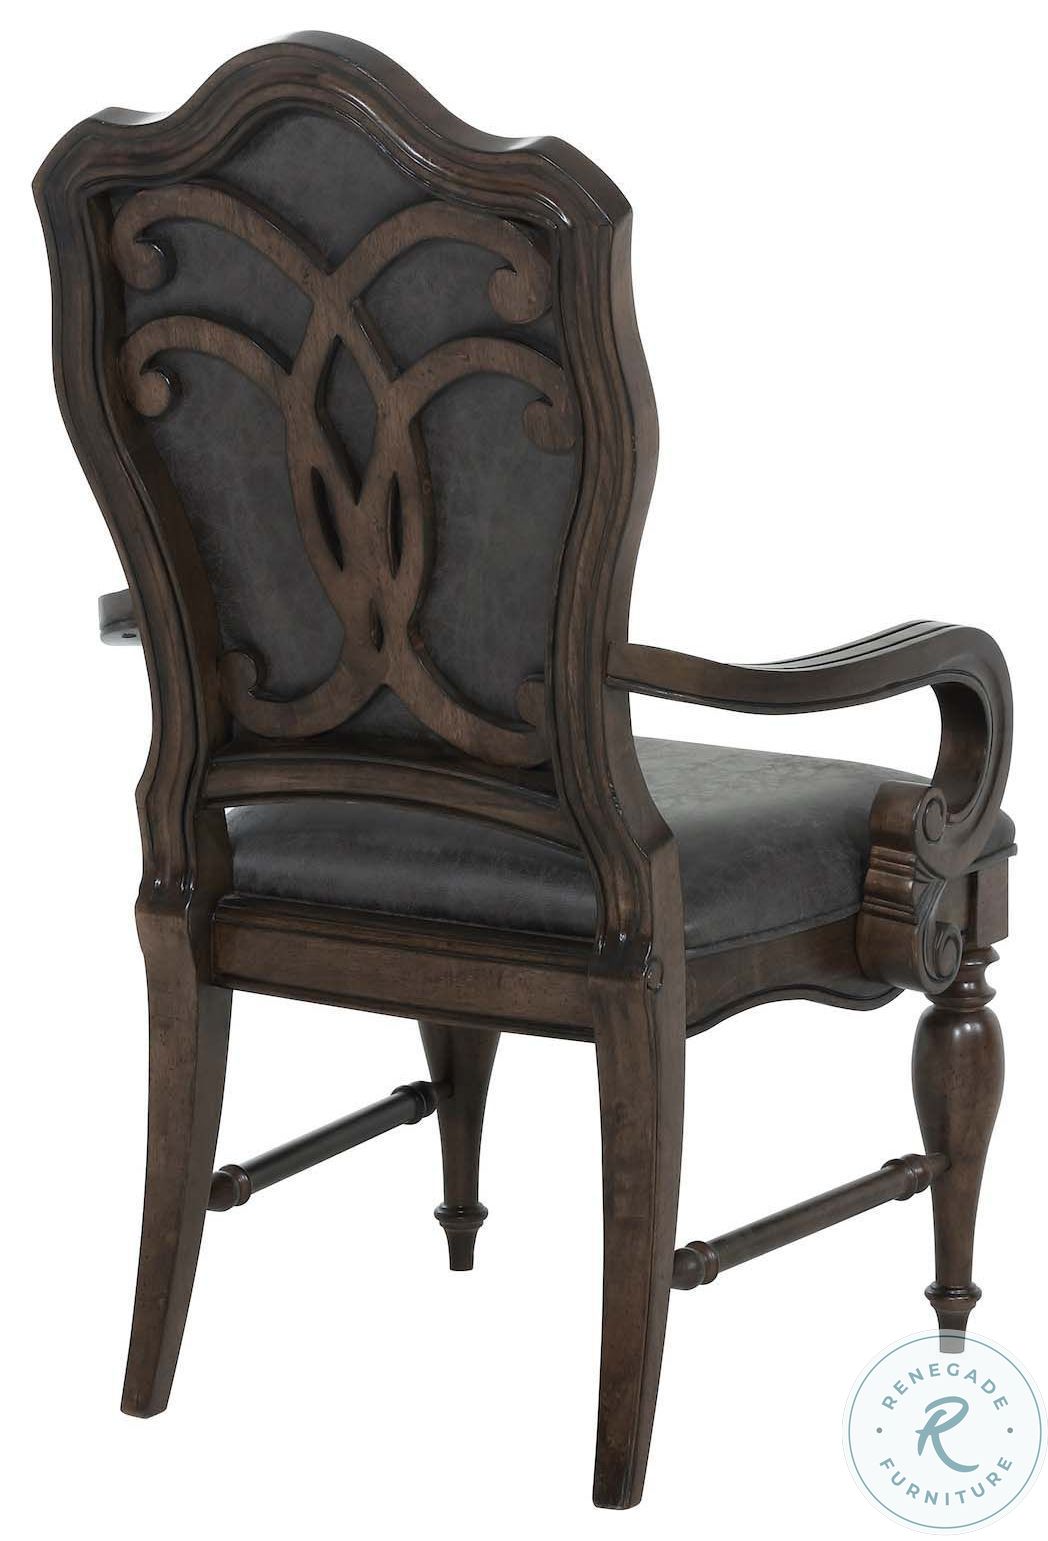 Set of 2 Armchairs in Rich Brown Solid Wood Acacia By: Alabama Beds